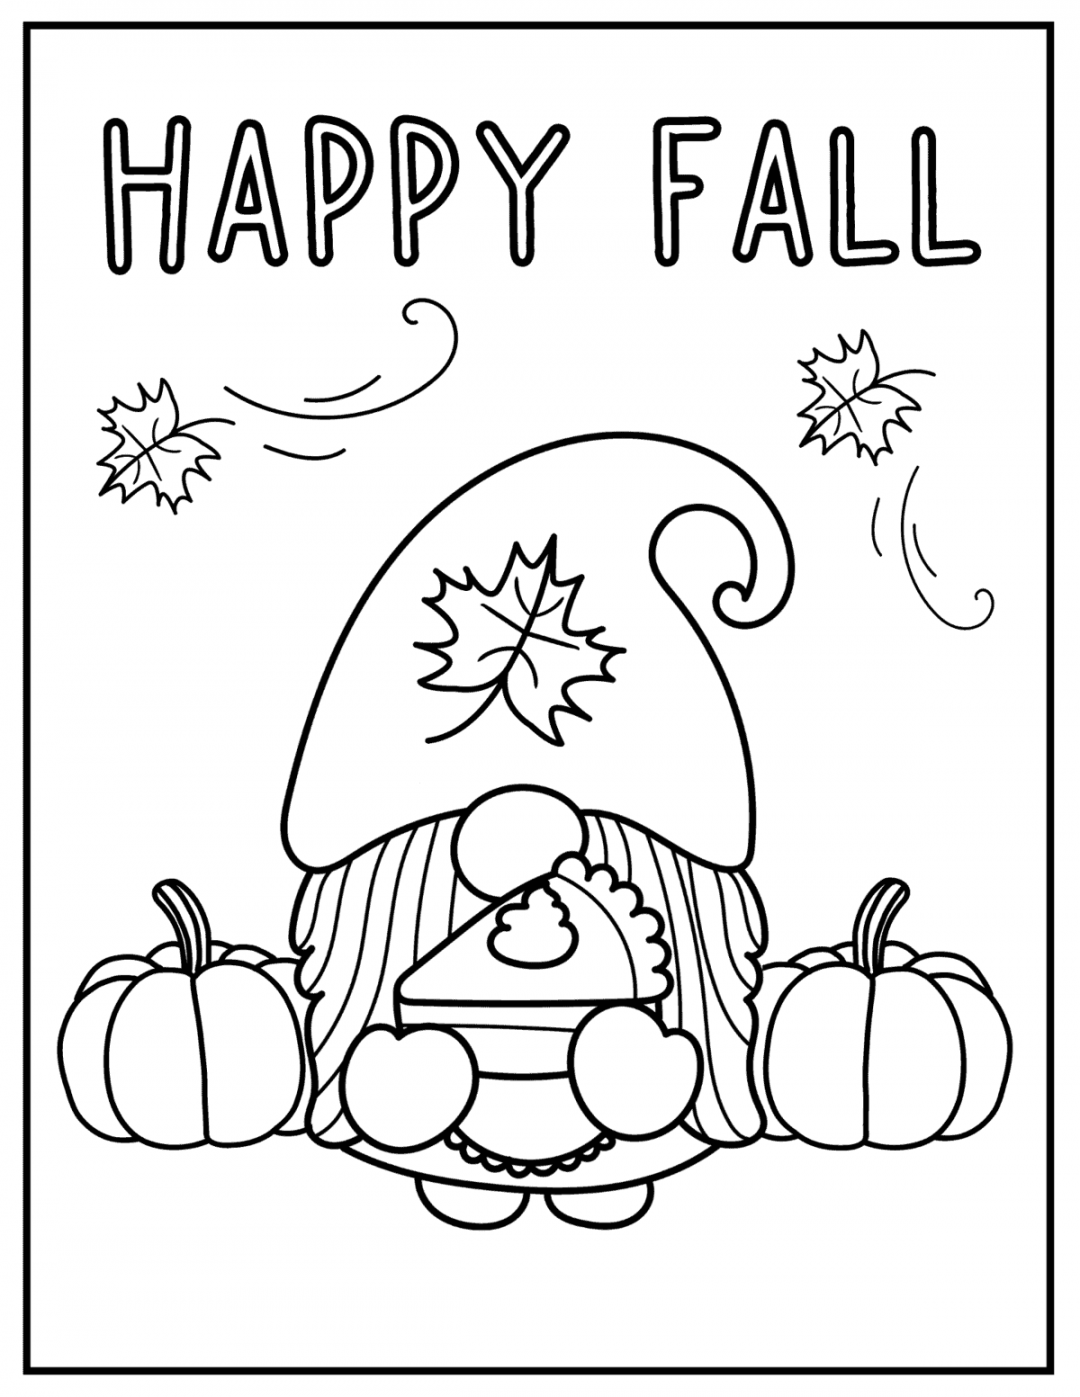 Free Printable Fall Coloring Pages - Prudent Penny Pincher - FREE Printables - Free Fall Printable Coloring Pages